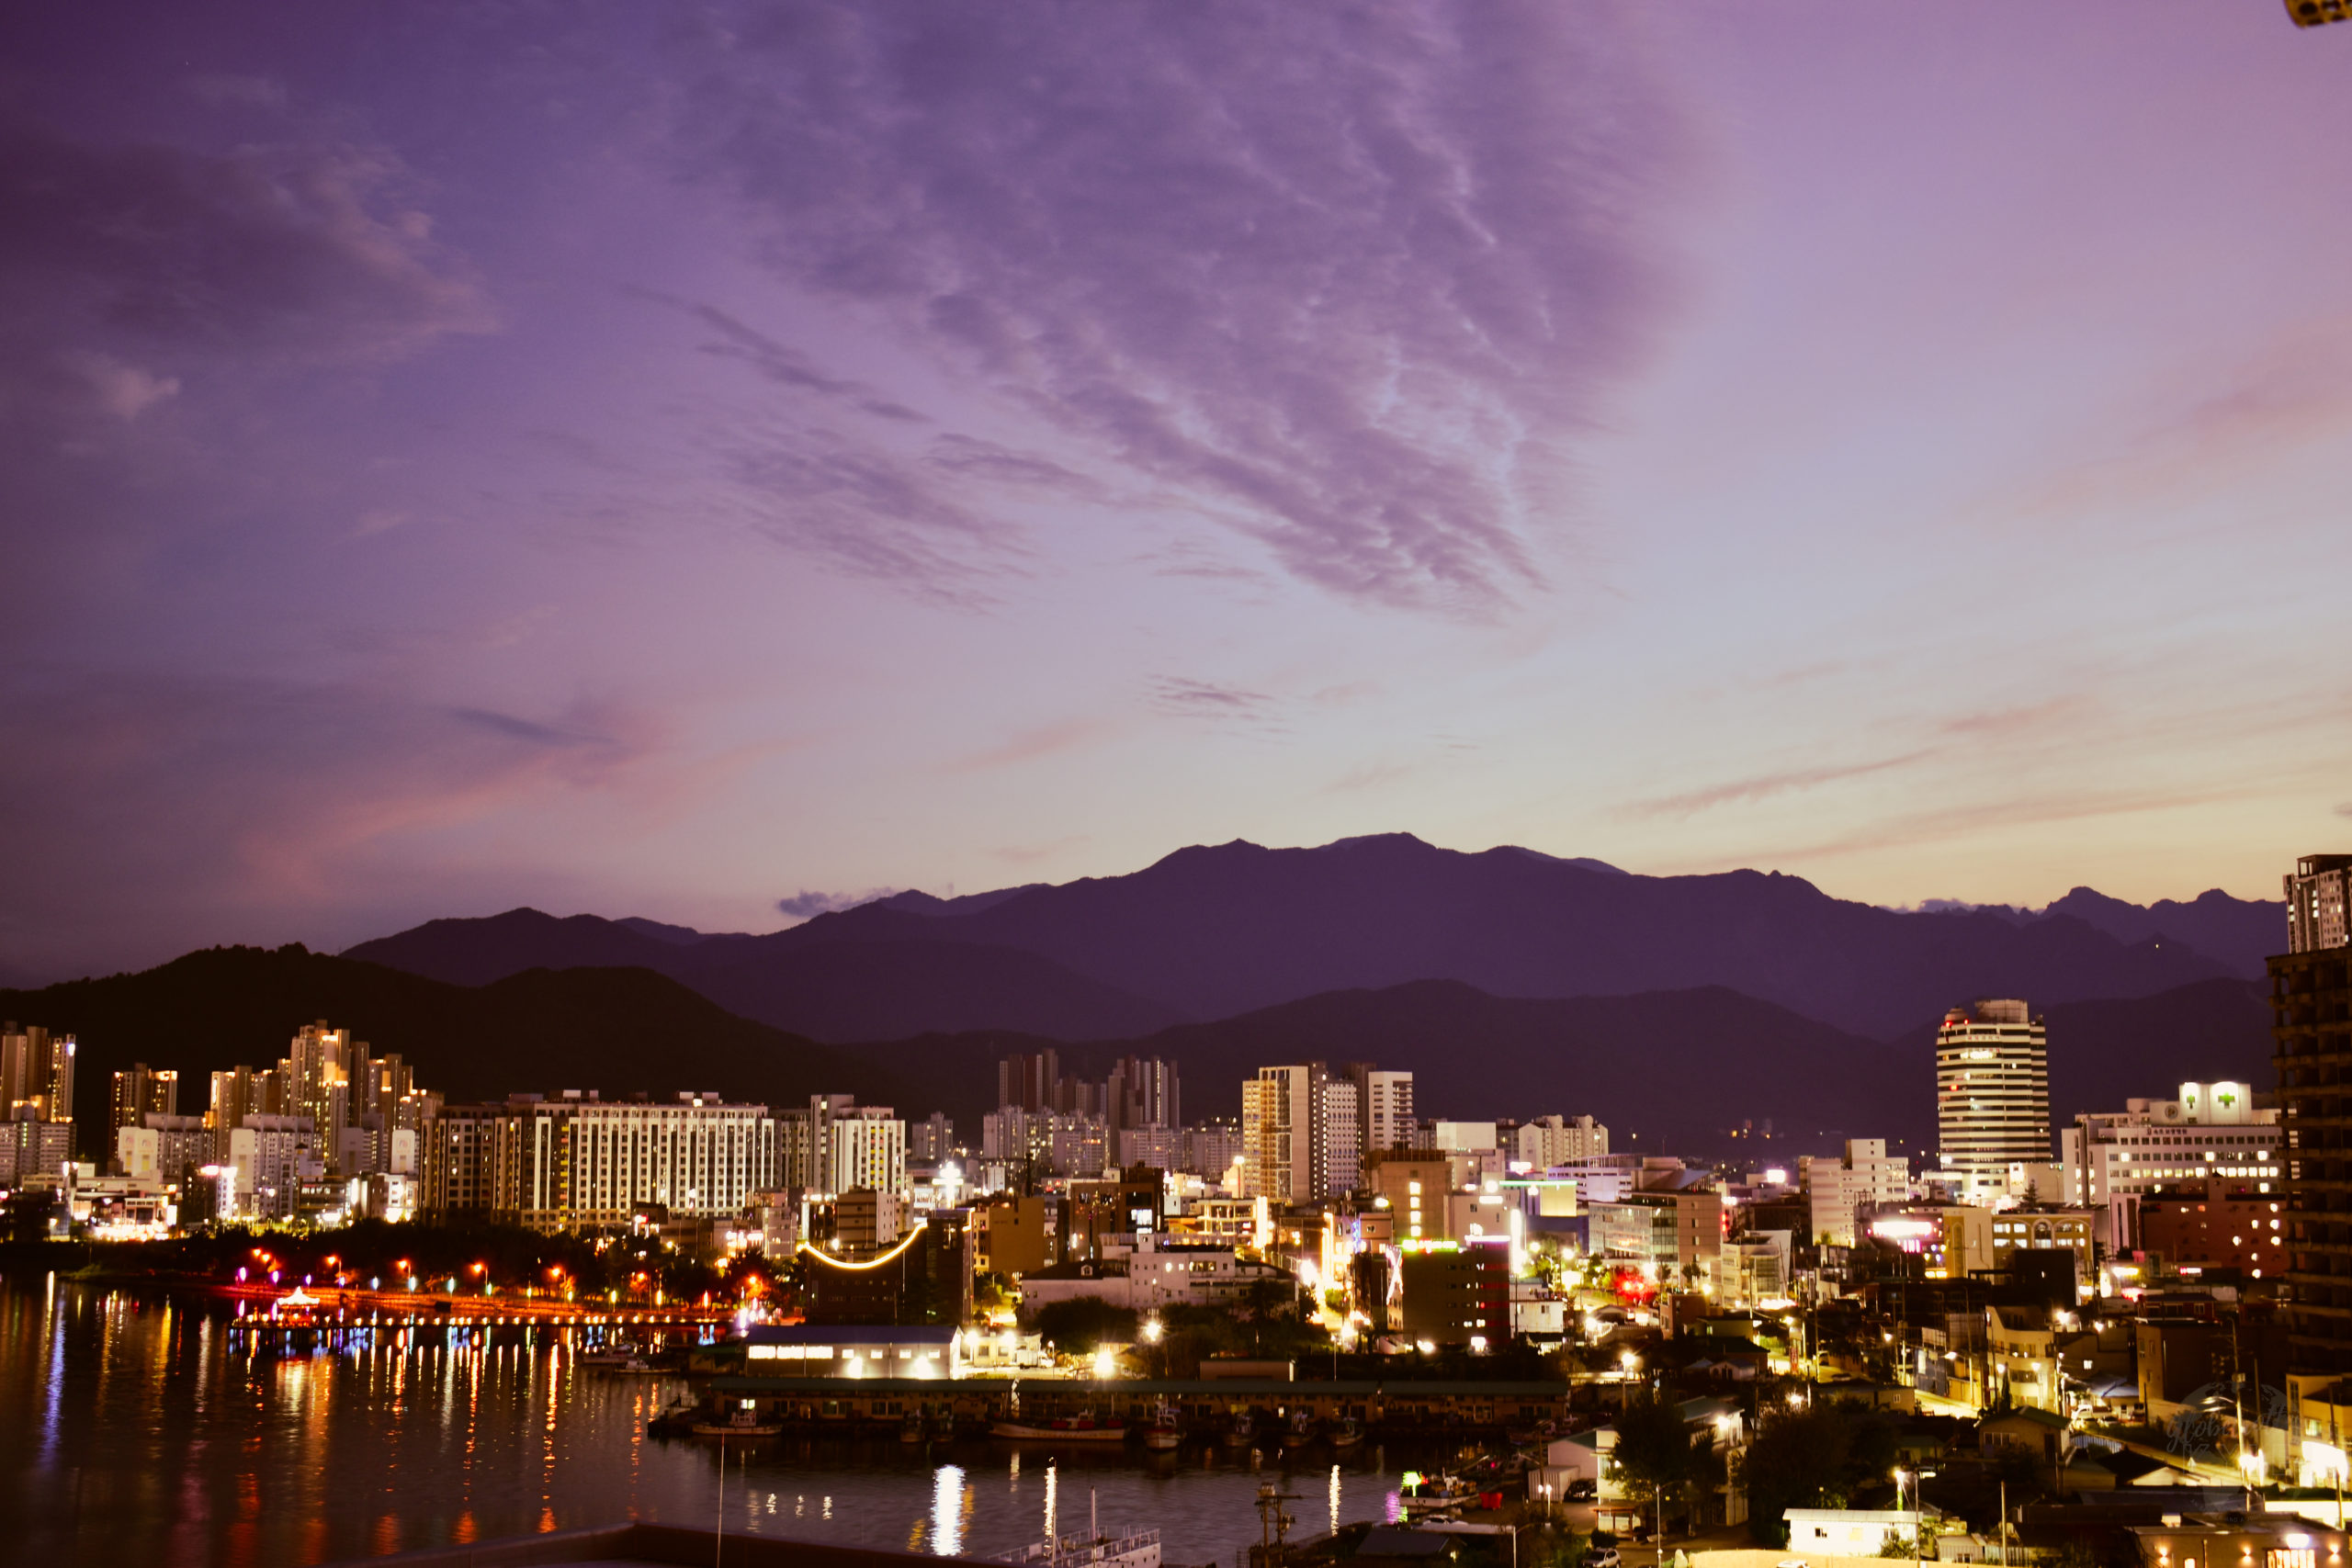 The Sokcho cityscape and Cheongcho Lake in front of the Taebaek mountain range at sunset